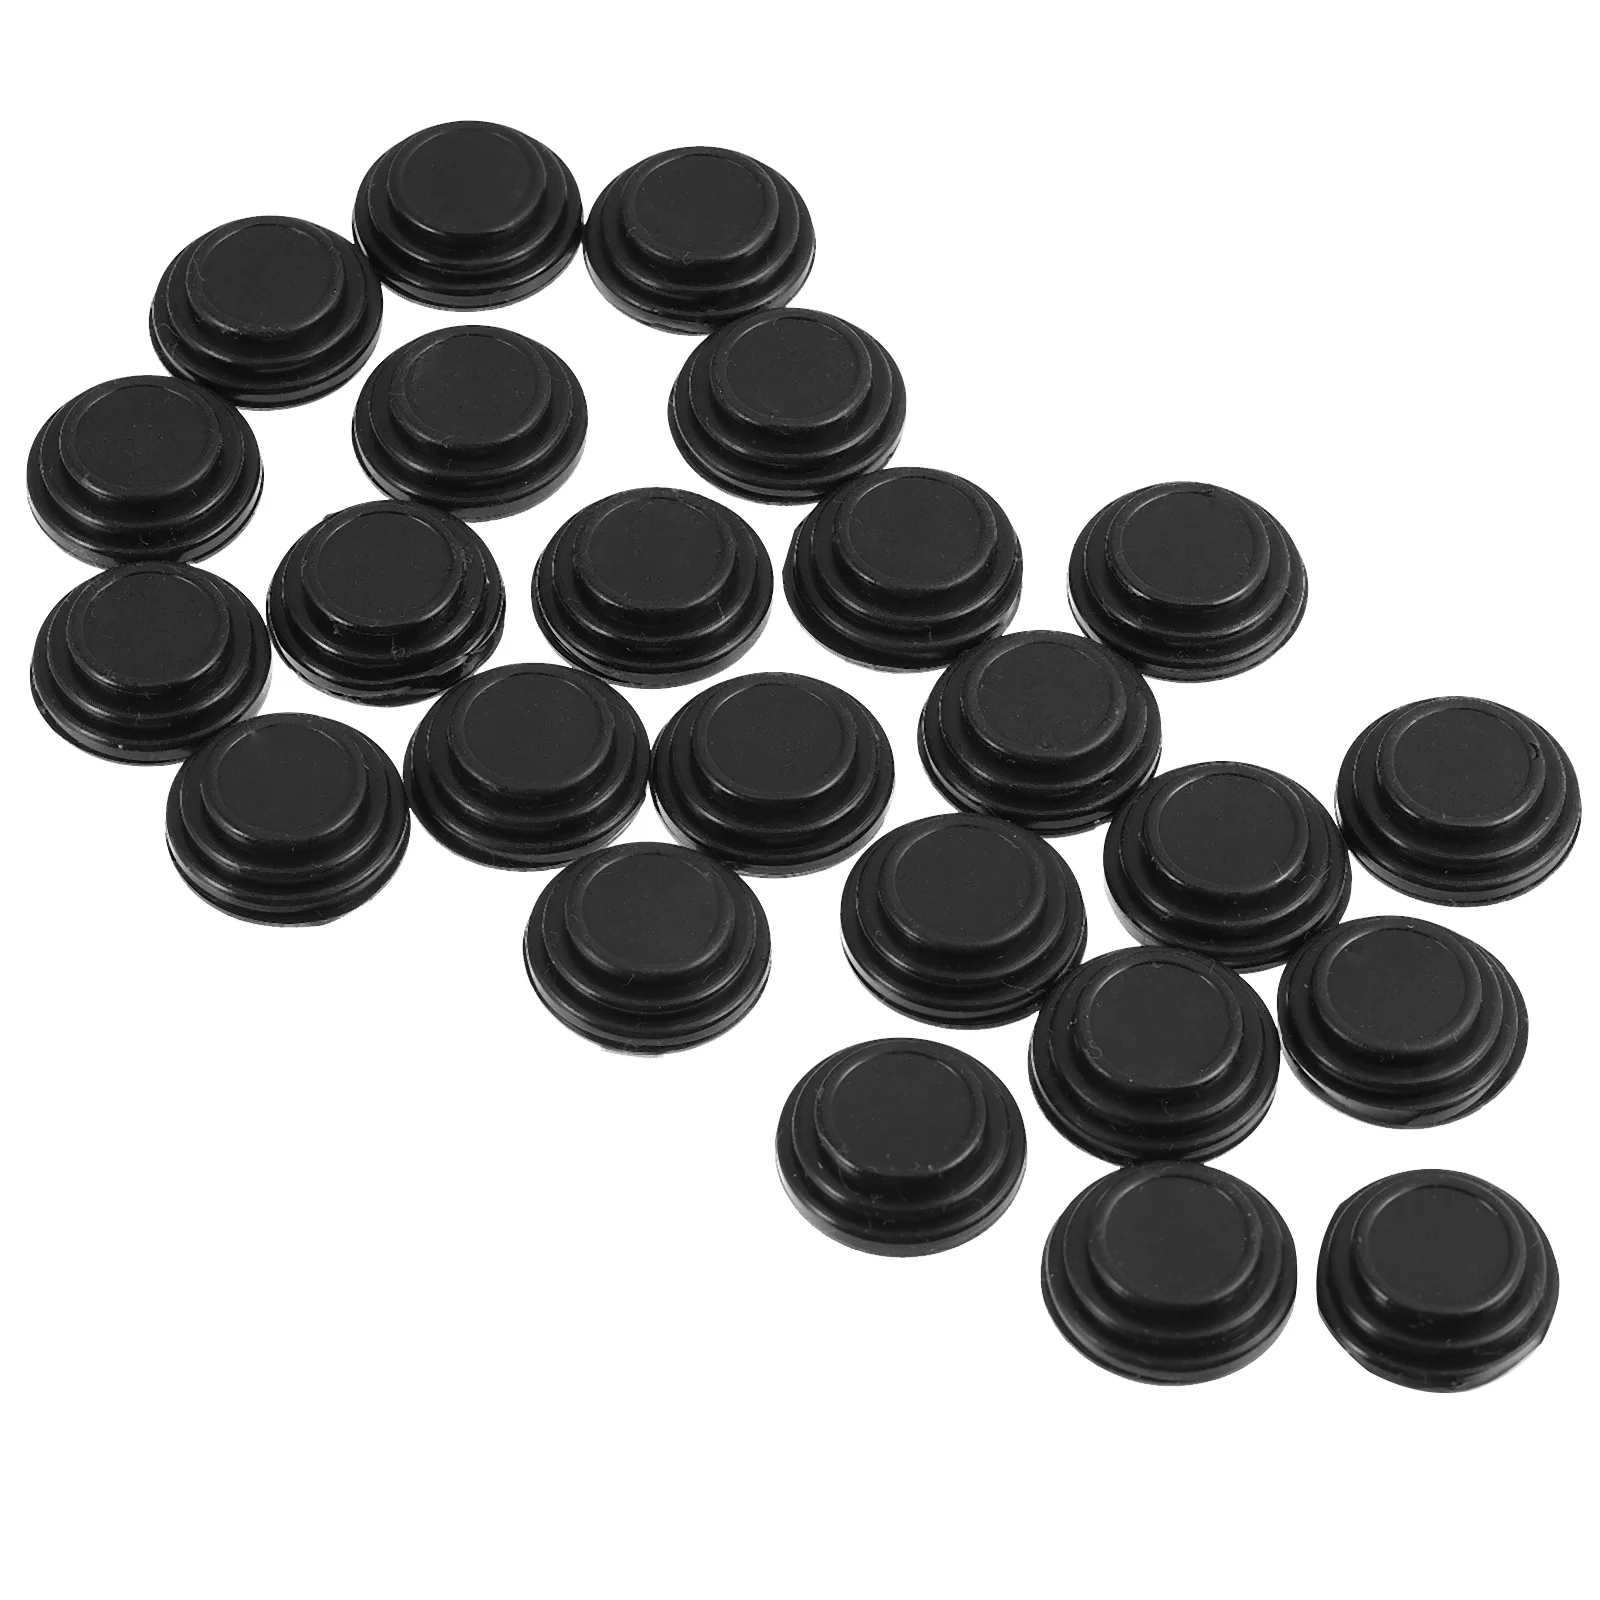 

24 Pcs Shock Absorbing Gasket Car Accessories Seal Stickers Shock-proof Gaskets Anti-collision Silicone Pads Muffler Protection